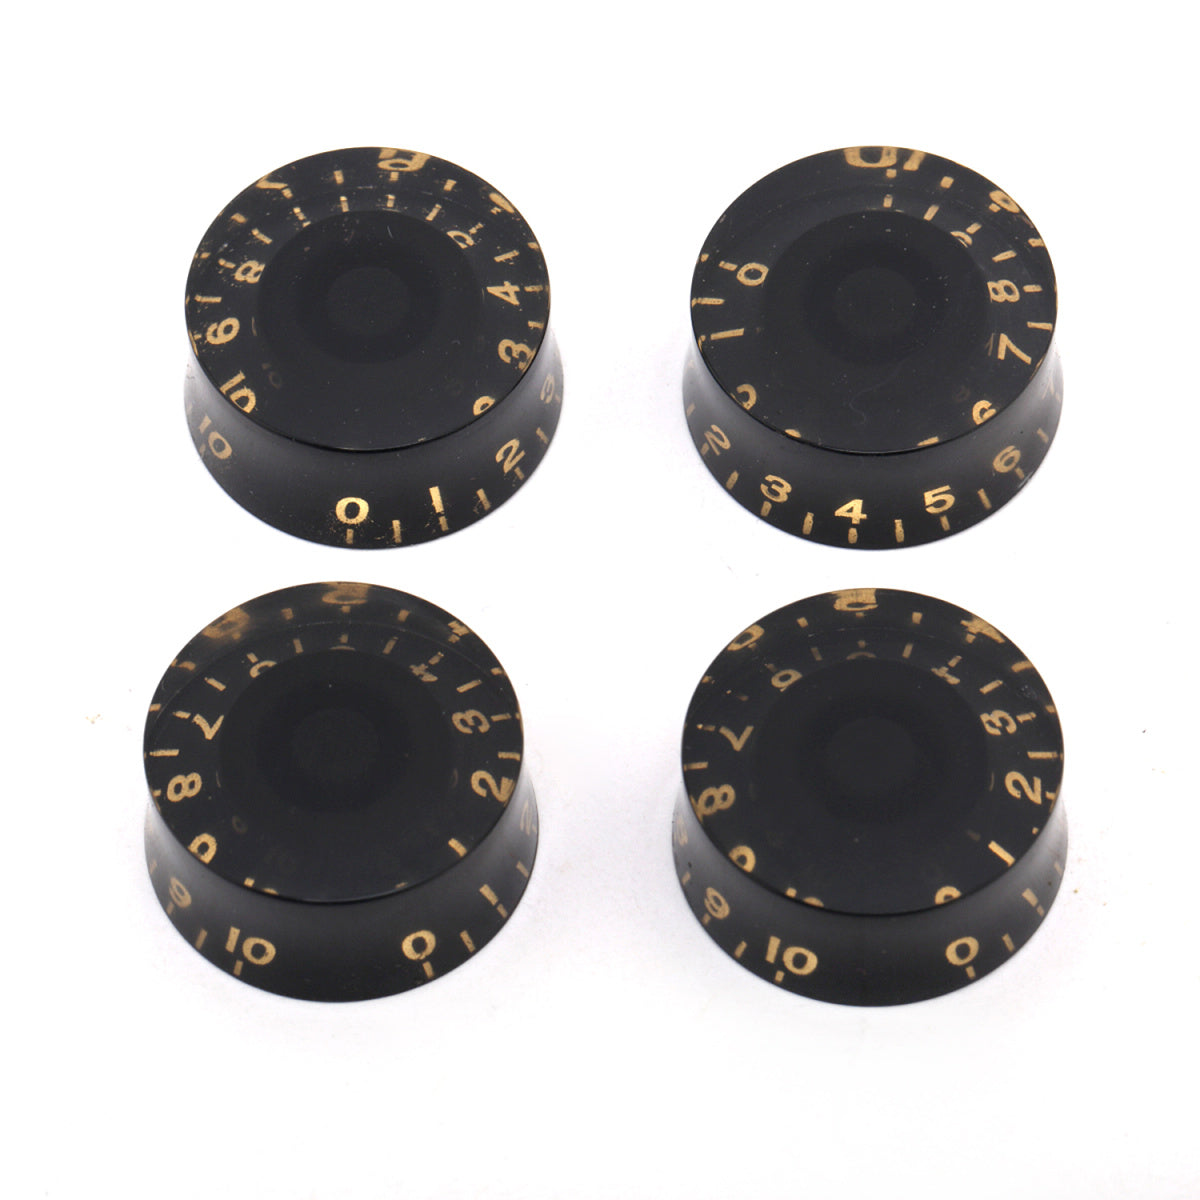 Musiclily Metric 6mm Plastic LP Style Guitar Speed Control Knobs ,Black with Gold Number ( 4 Pieces)